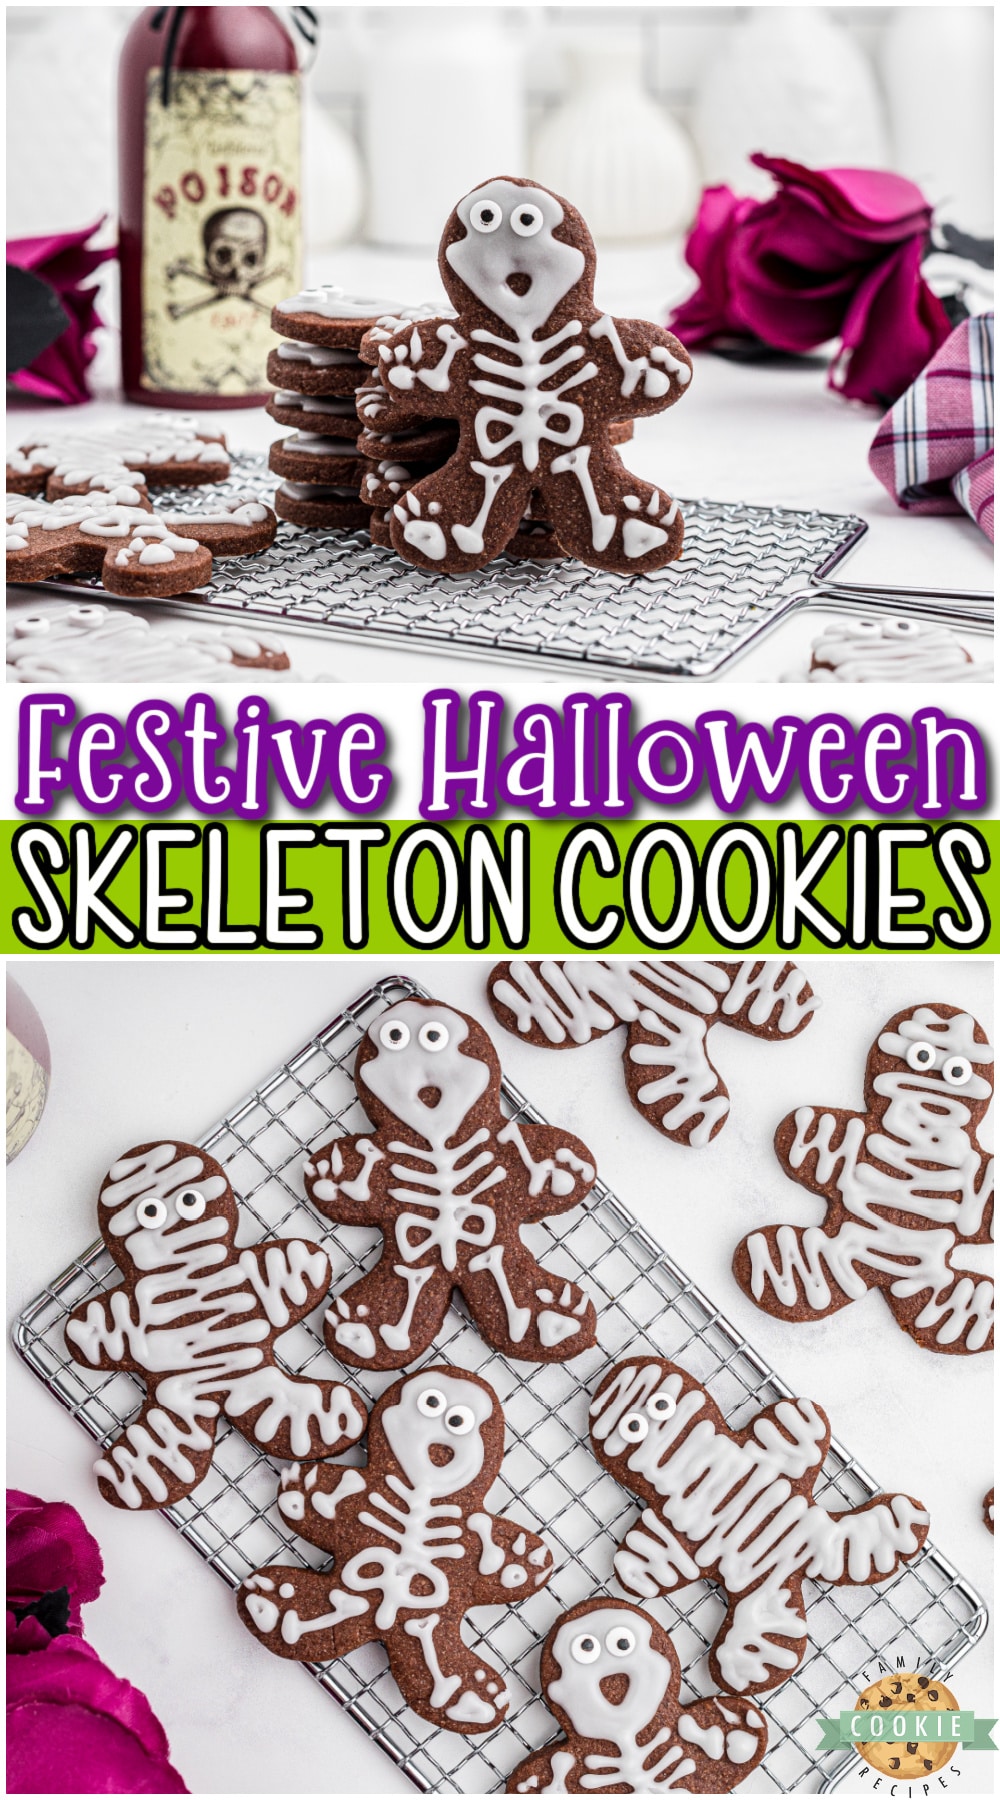 Halloween Skeleton Cookies are festive & fun chocolate sugar cookies decorated in a perfectly creepy way! Simple cut-out skeleton cookies that are fun to make & enjoy!